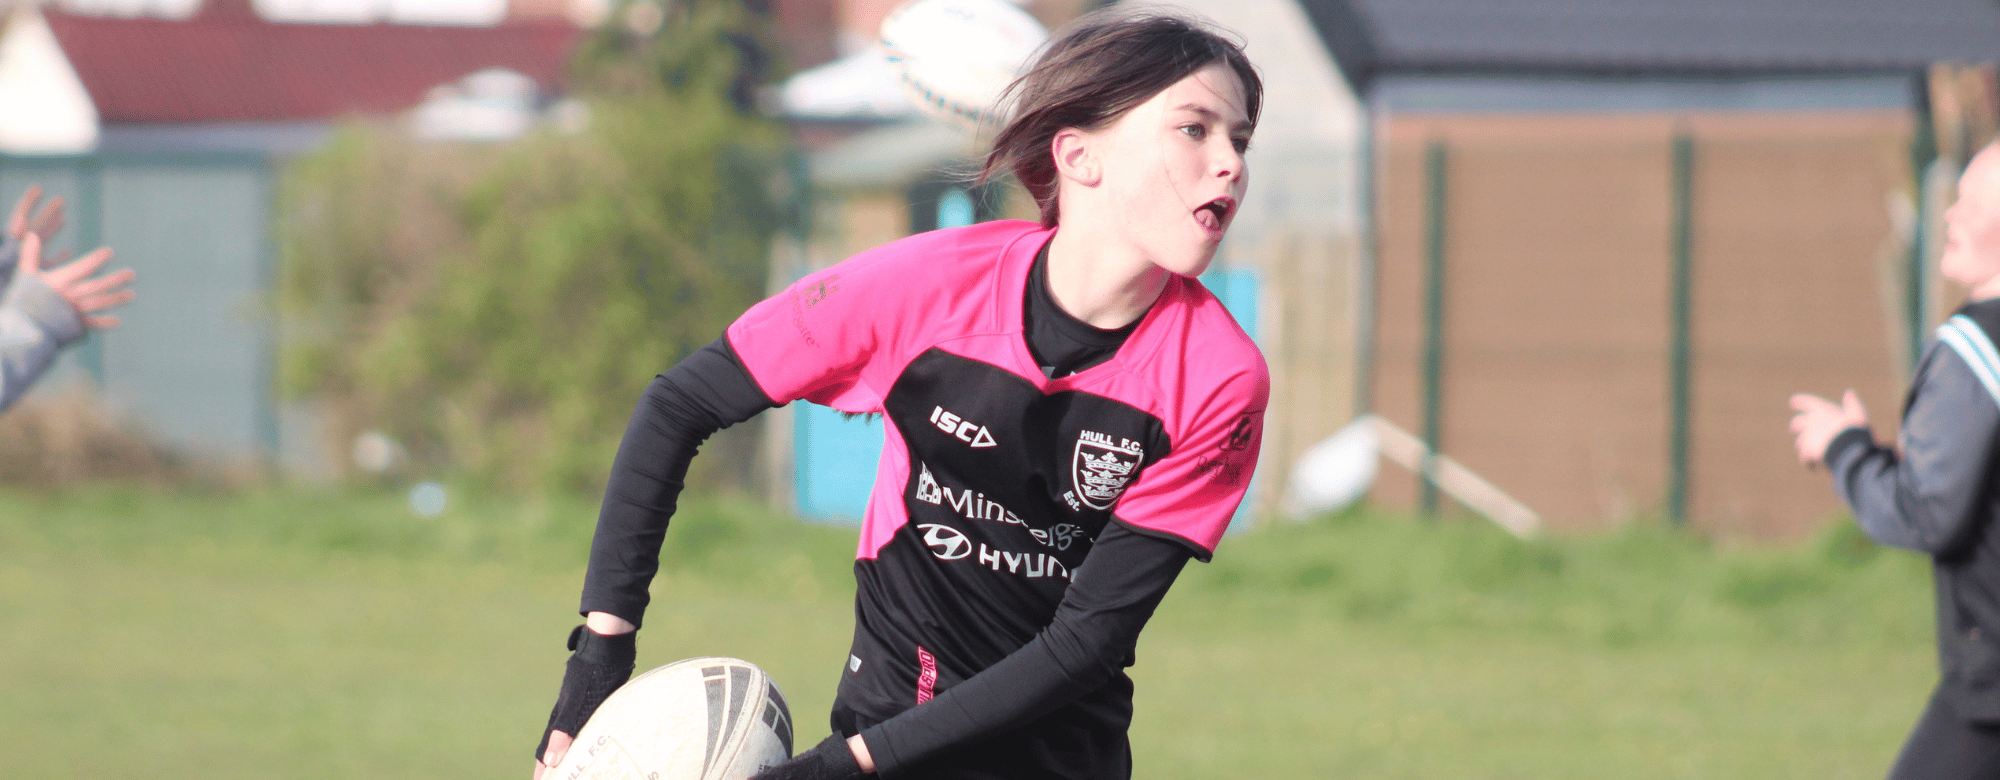 New RugBees Programme To Inspire Local Girls To Play Rugby League